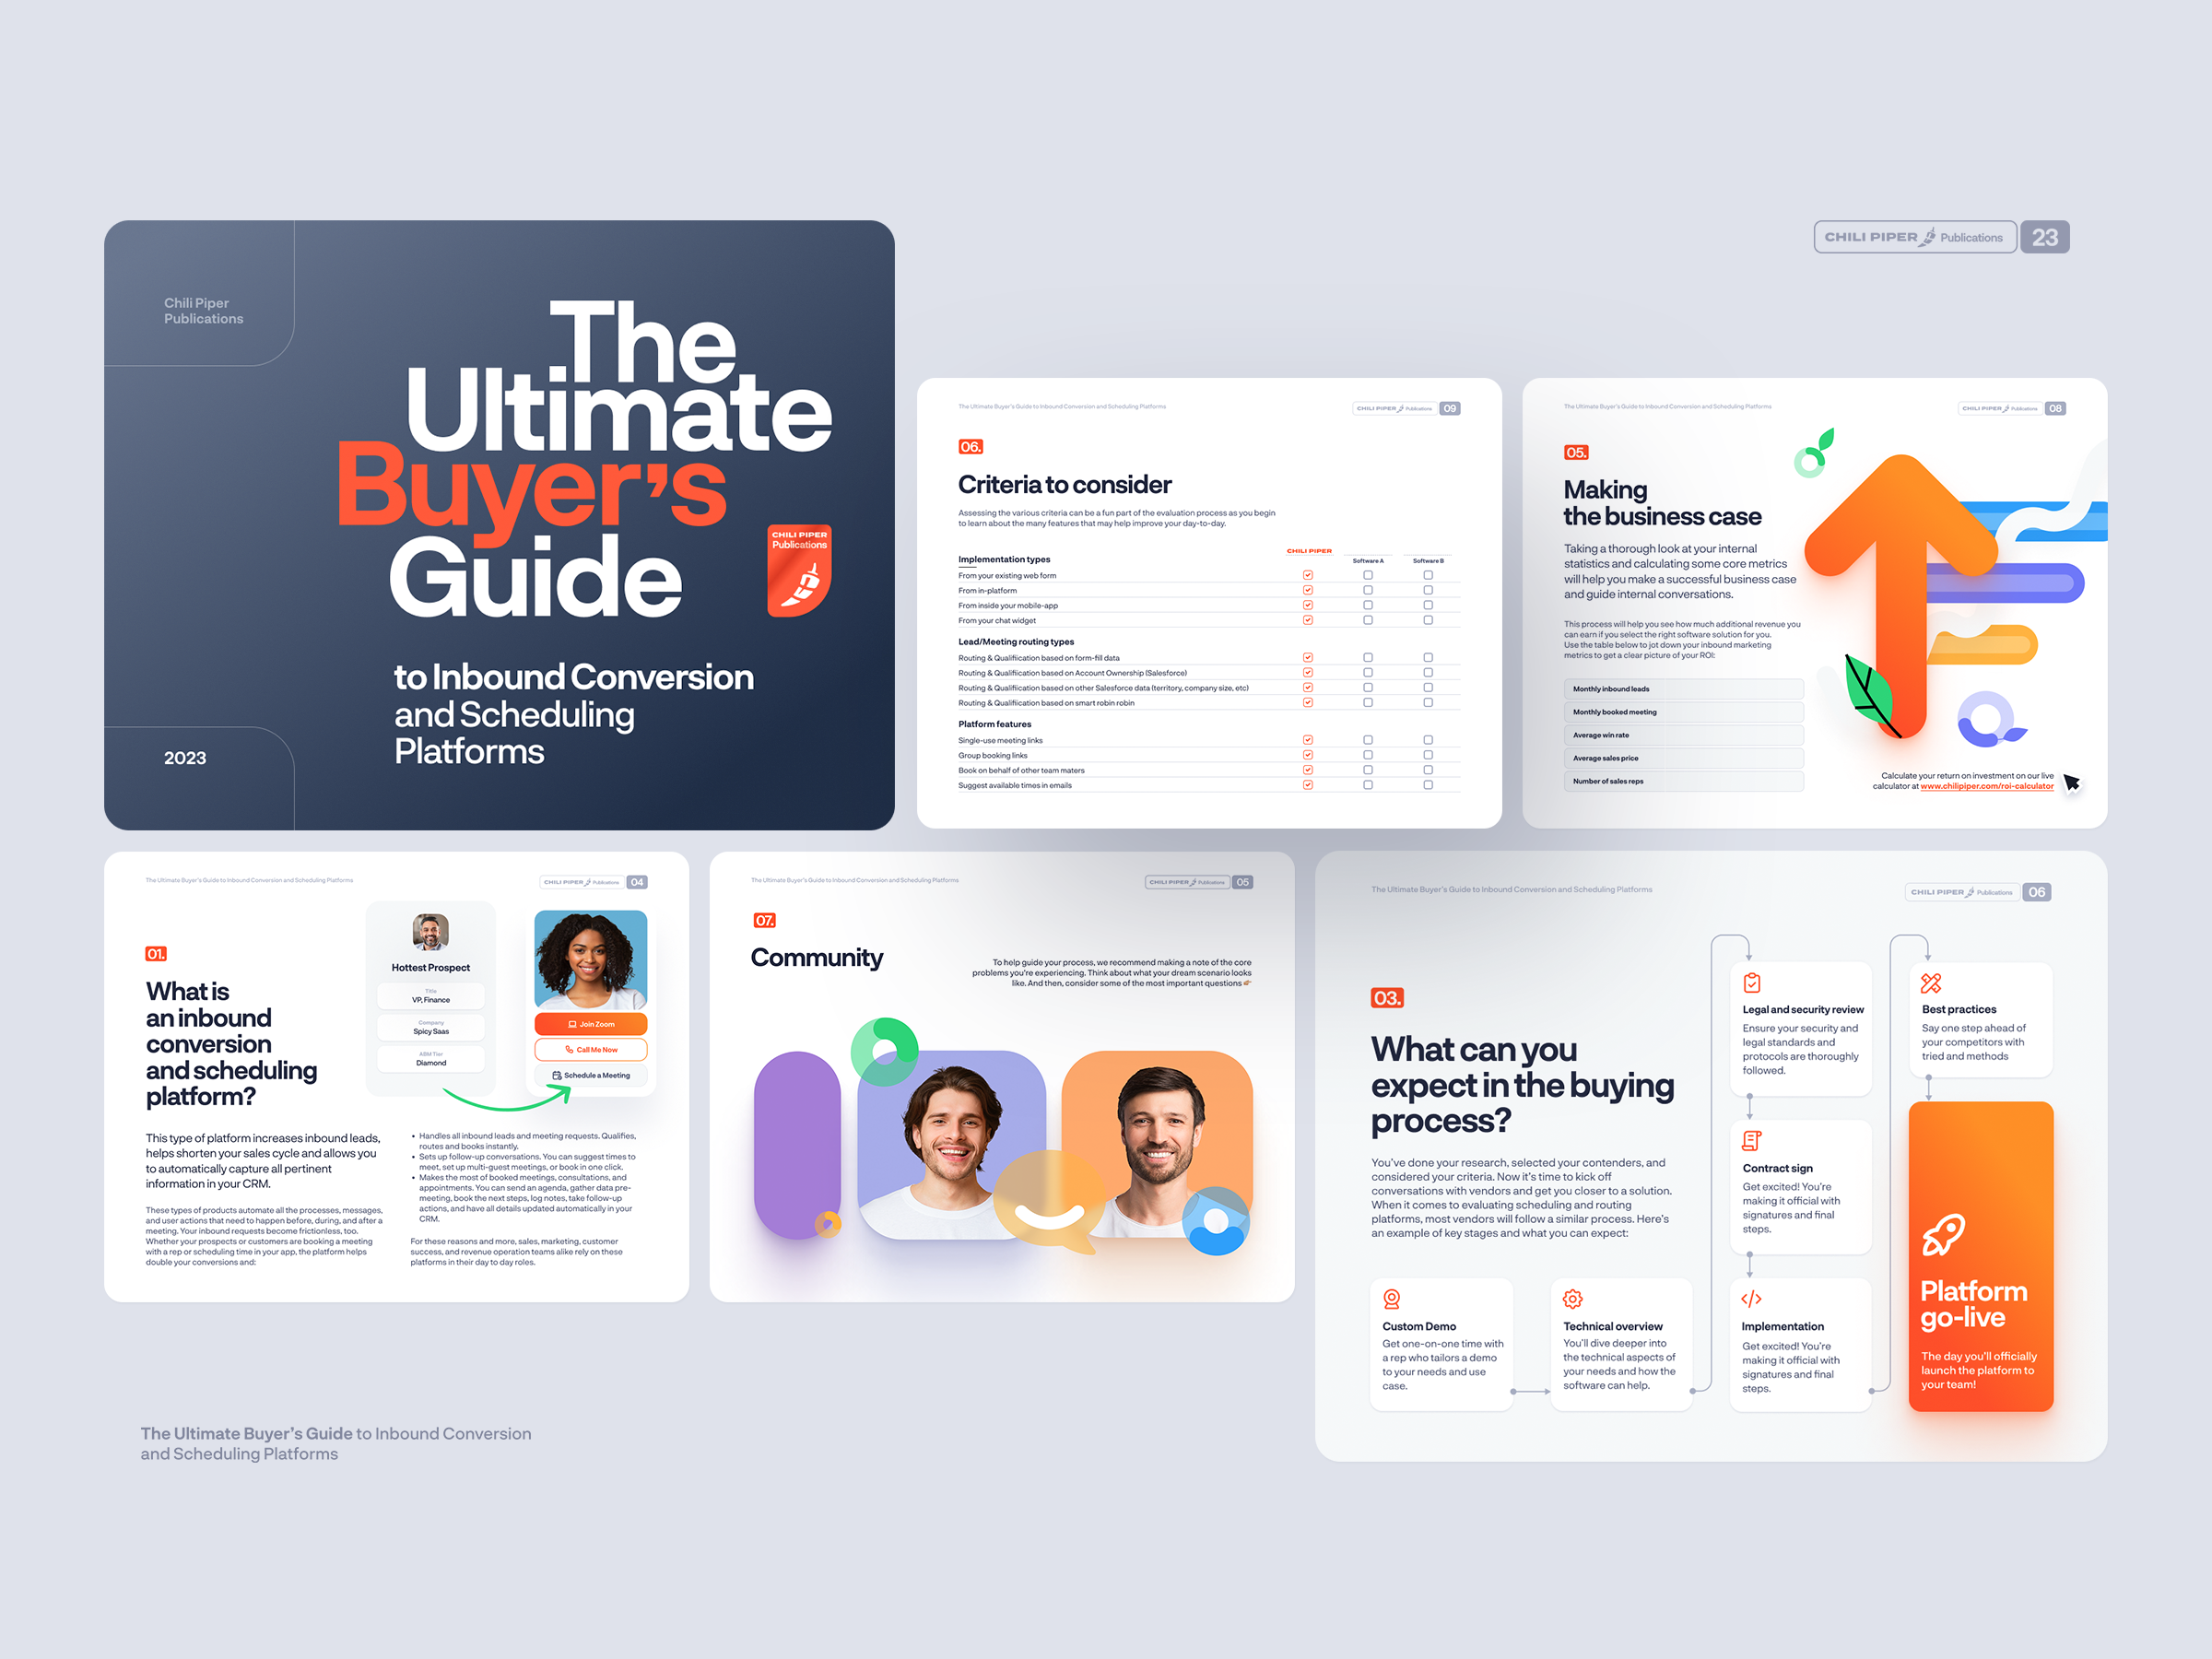 The Ultimate Buyer's Guide